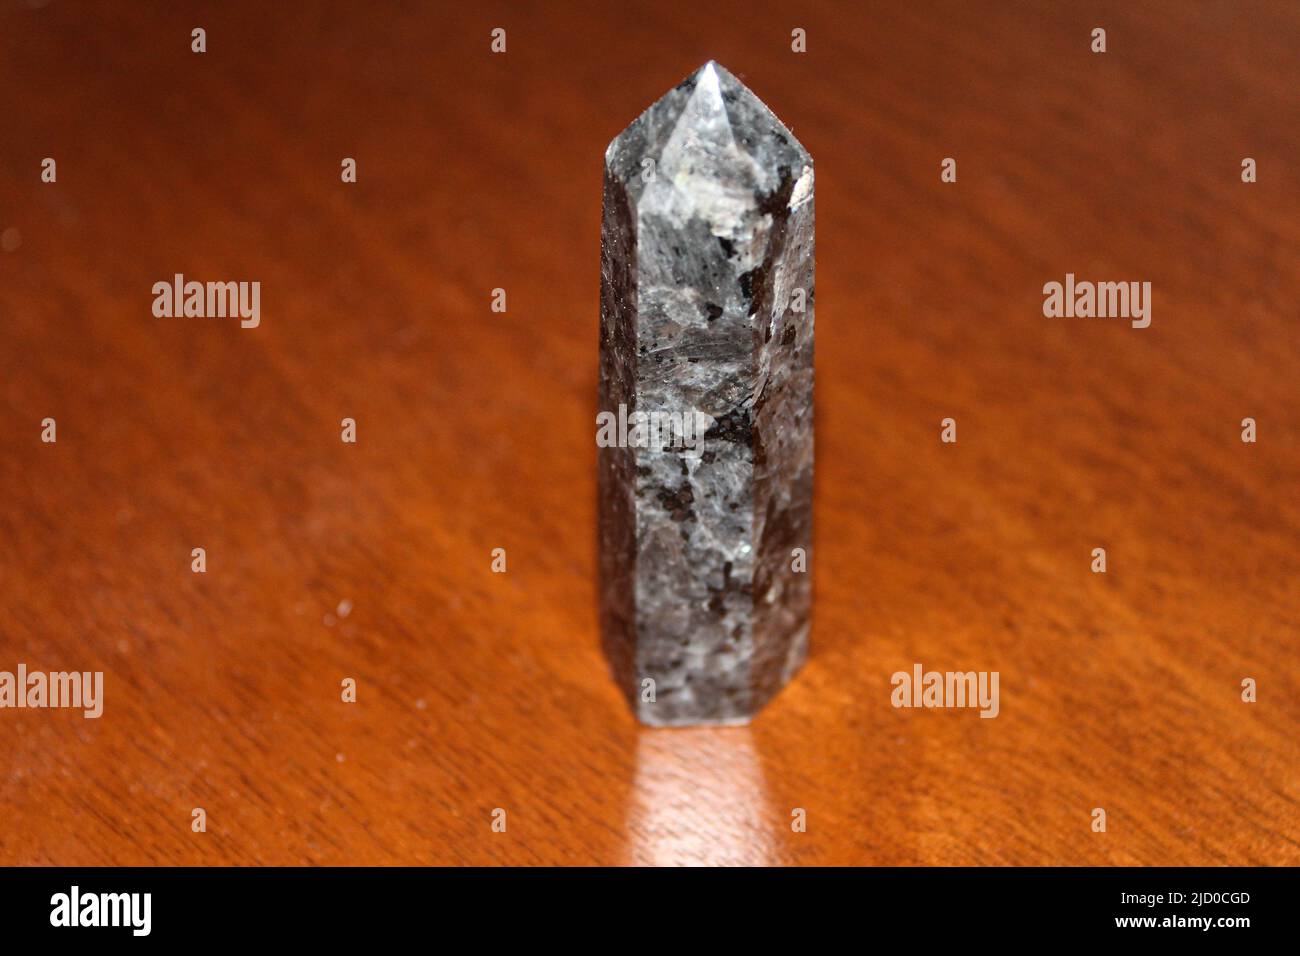 Top view of a polished larvikite point also known as a Larvikite tower crystal. A stone that evokes inner strength by stimulating creativity, wisdom, Stock Photo